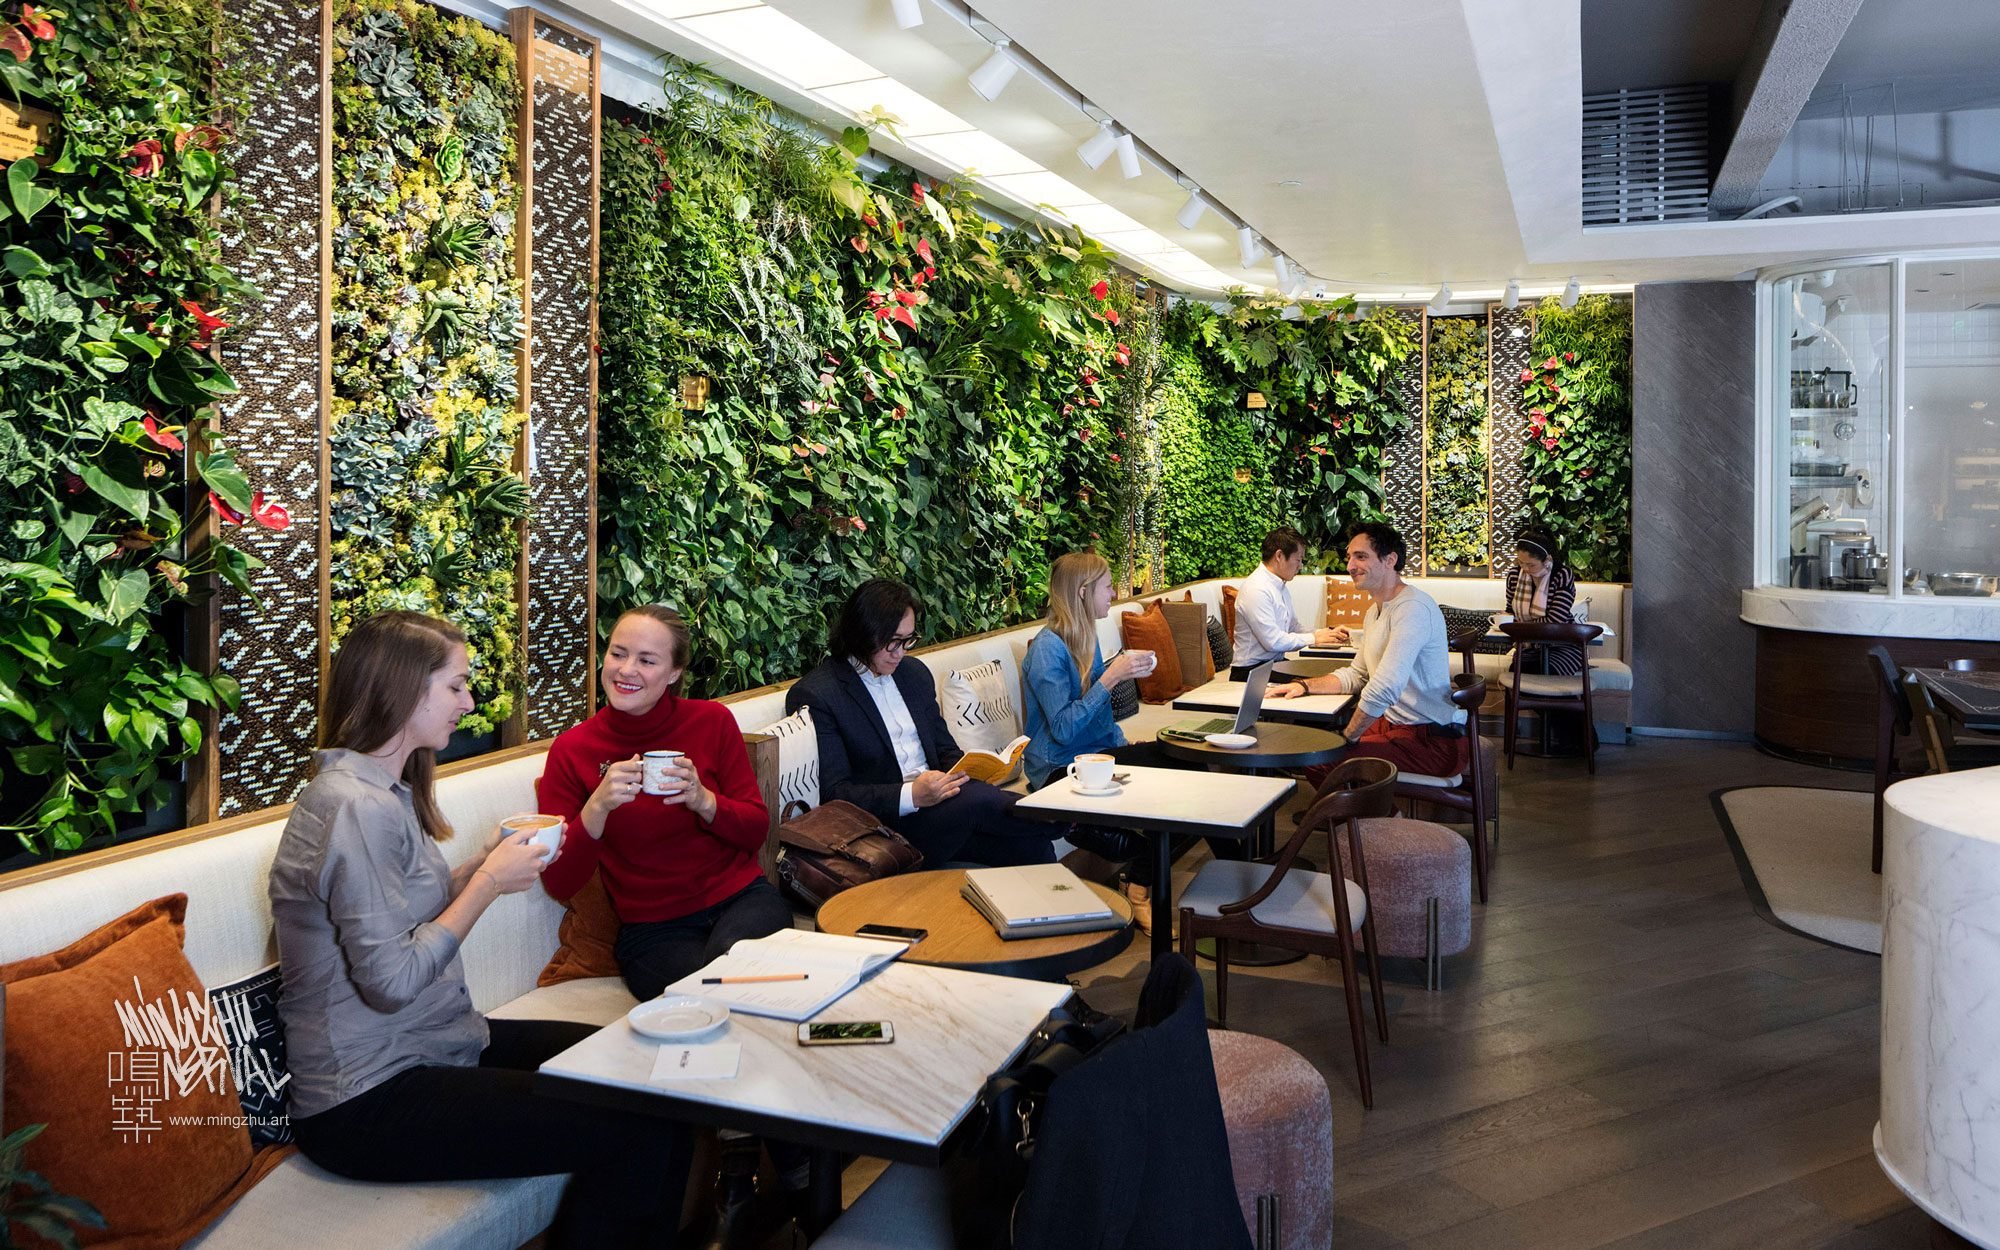 At Mingzhu Nerval, we thrive at creating the most beautiful vertical gardens in the world. For Peet's Coffee, we created a californian living wall design – Shanghai, 2017.